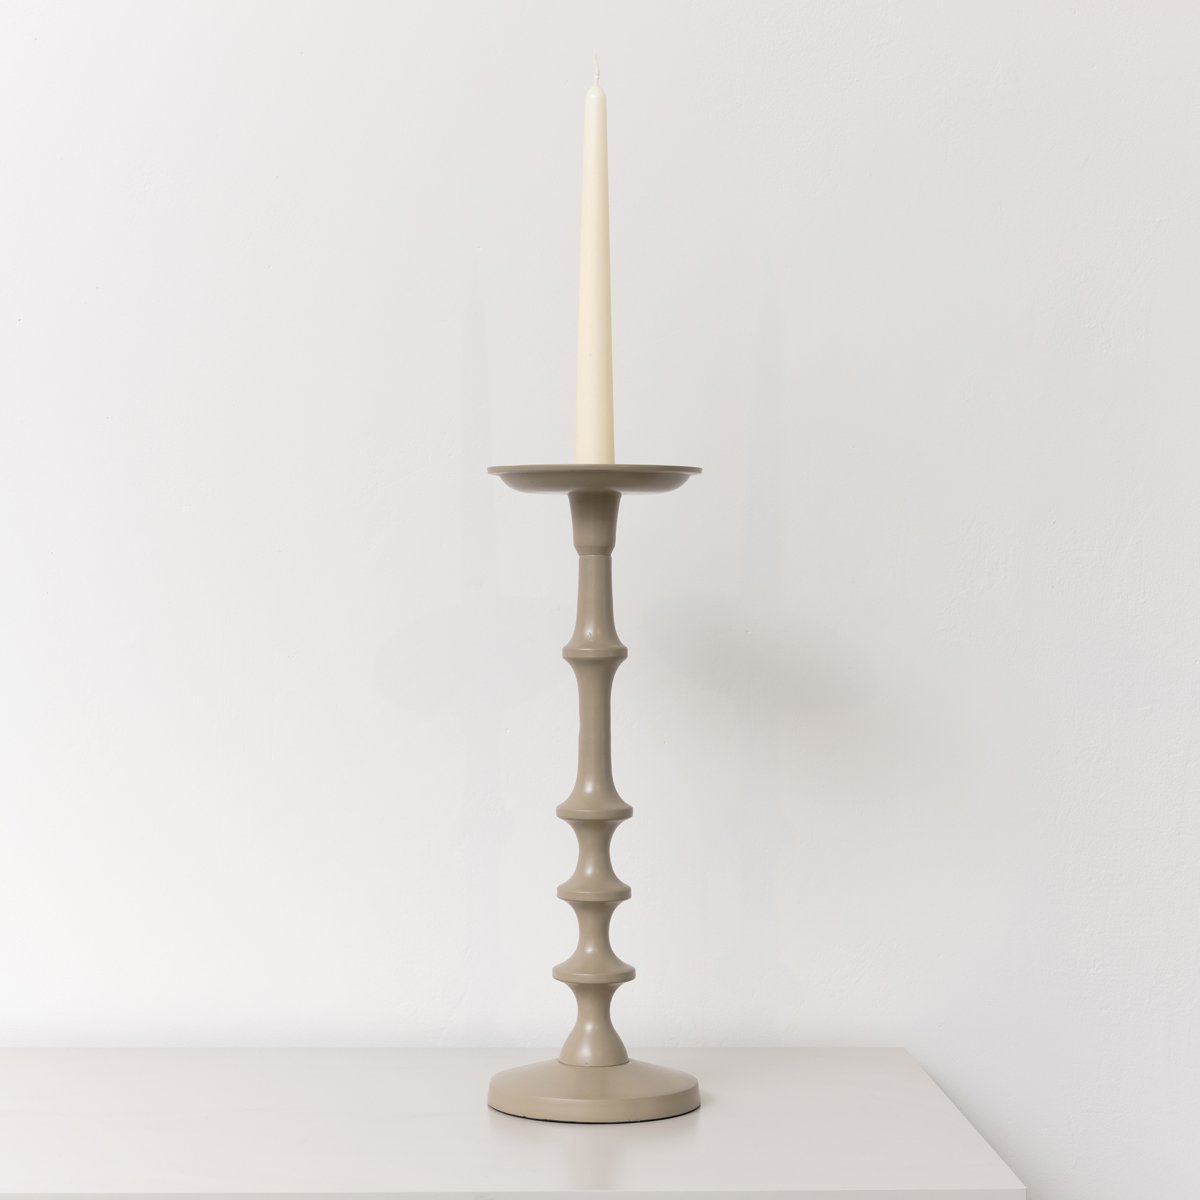 Large Taupe Candle Holder - 36cm